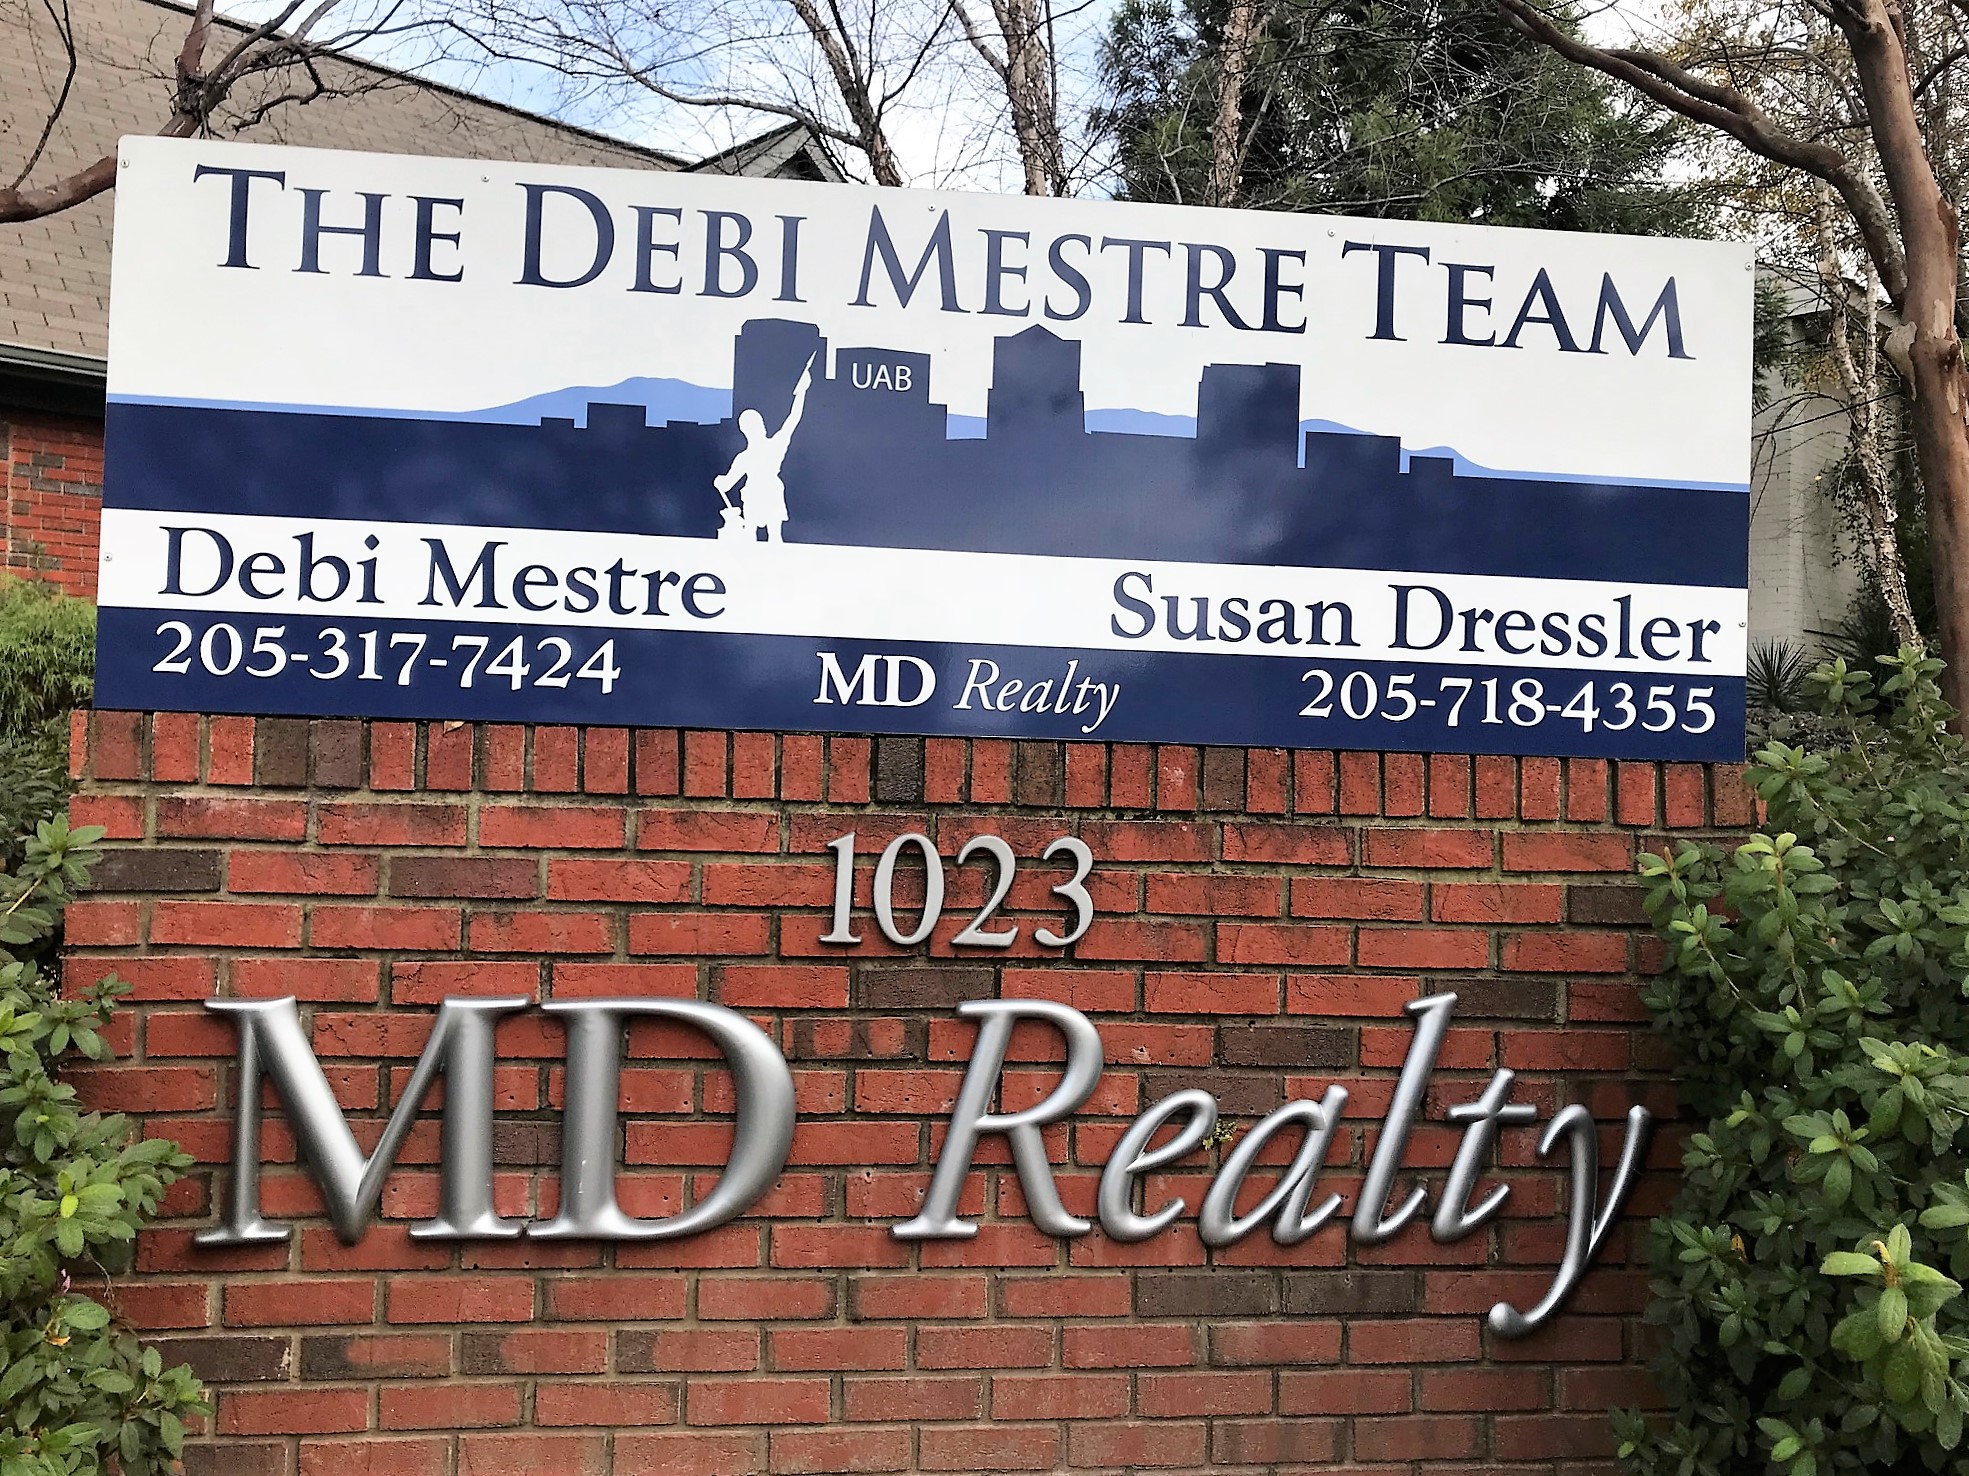 MD Realty